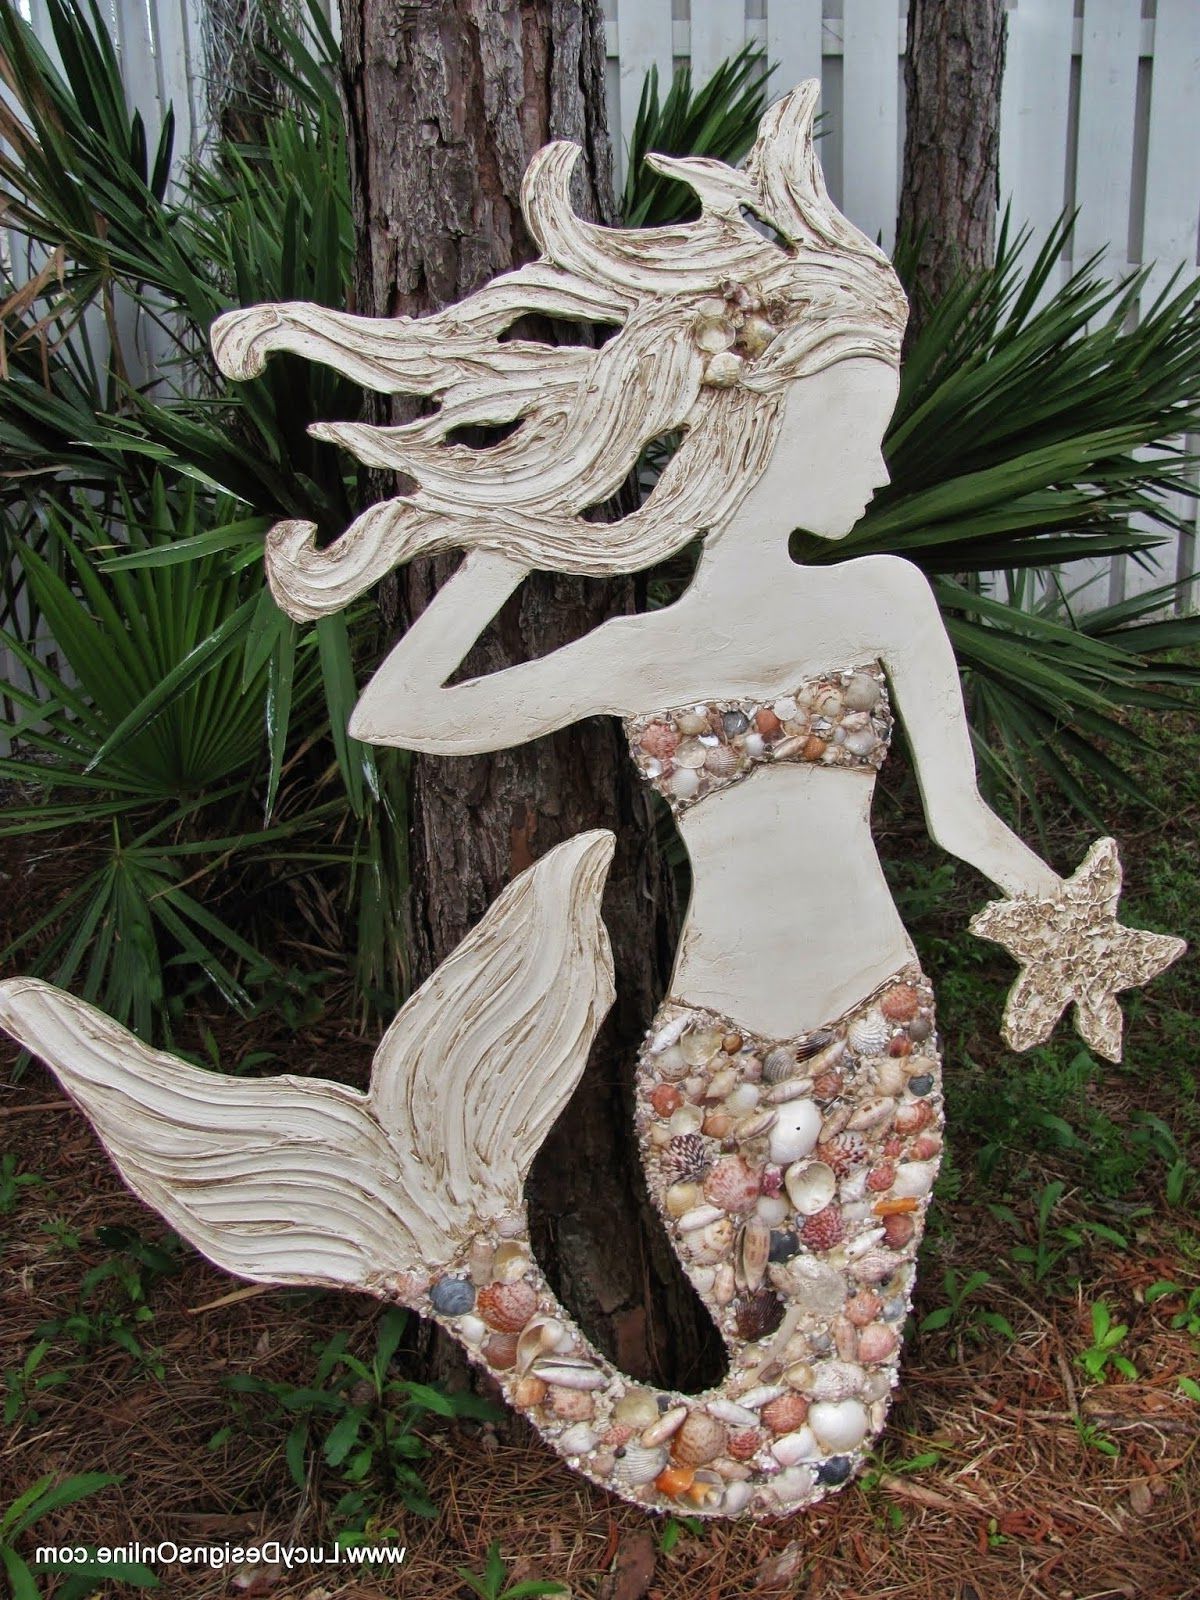 Mermaid Wall Art New Design With Sea Shells, Crushed Glass And Inside Widely Used Wooden Mermaid Wall Art (View 10 of 15)